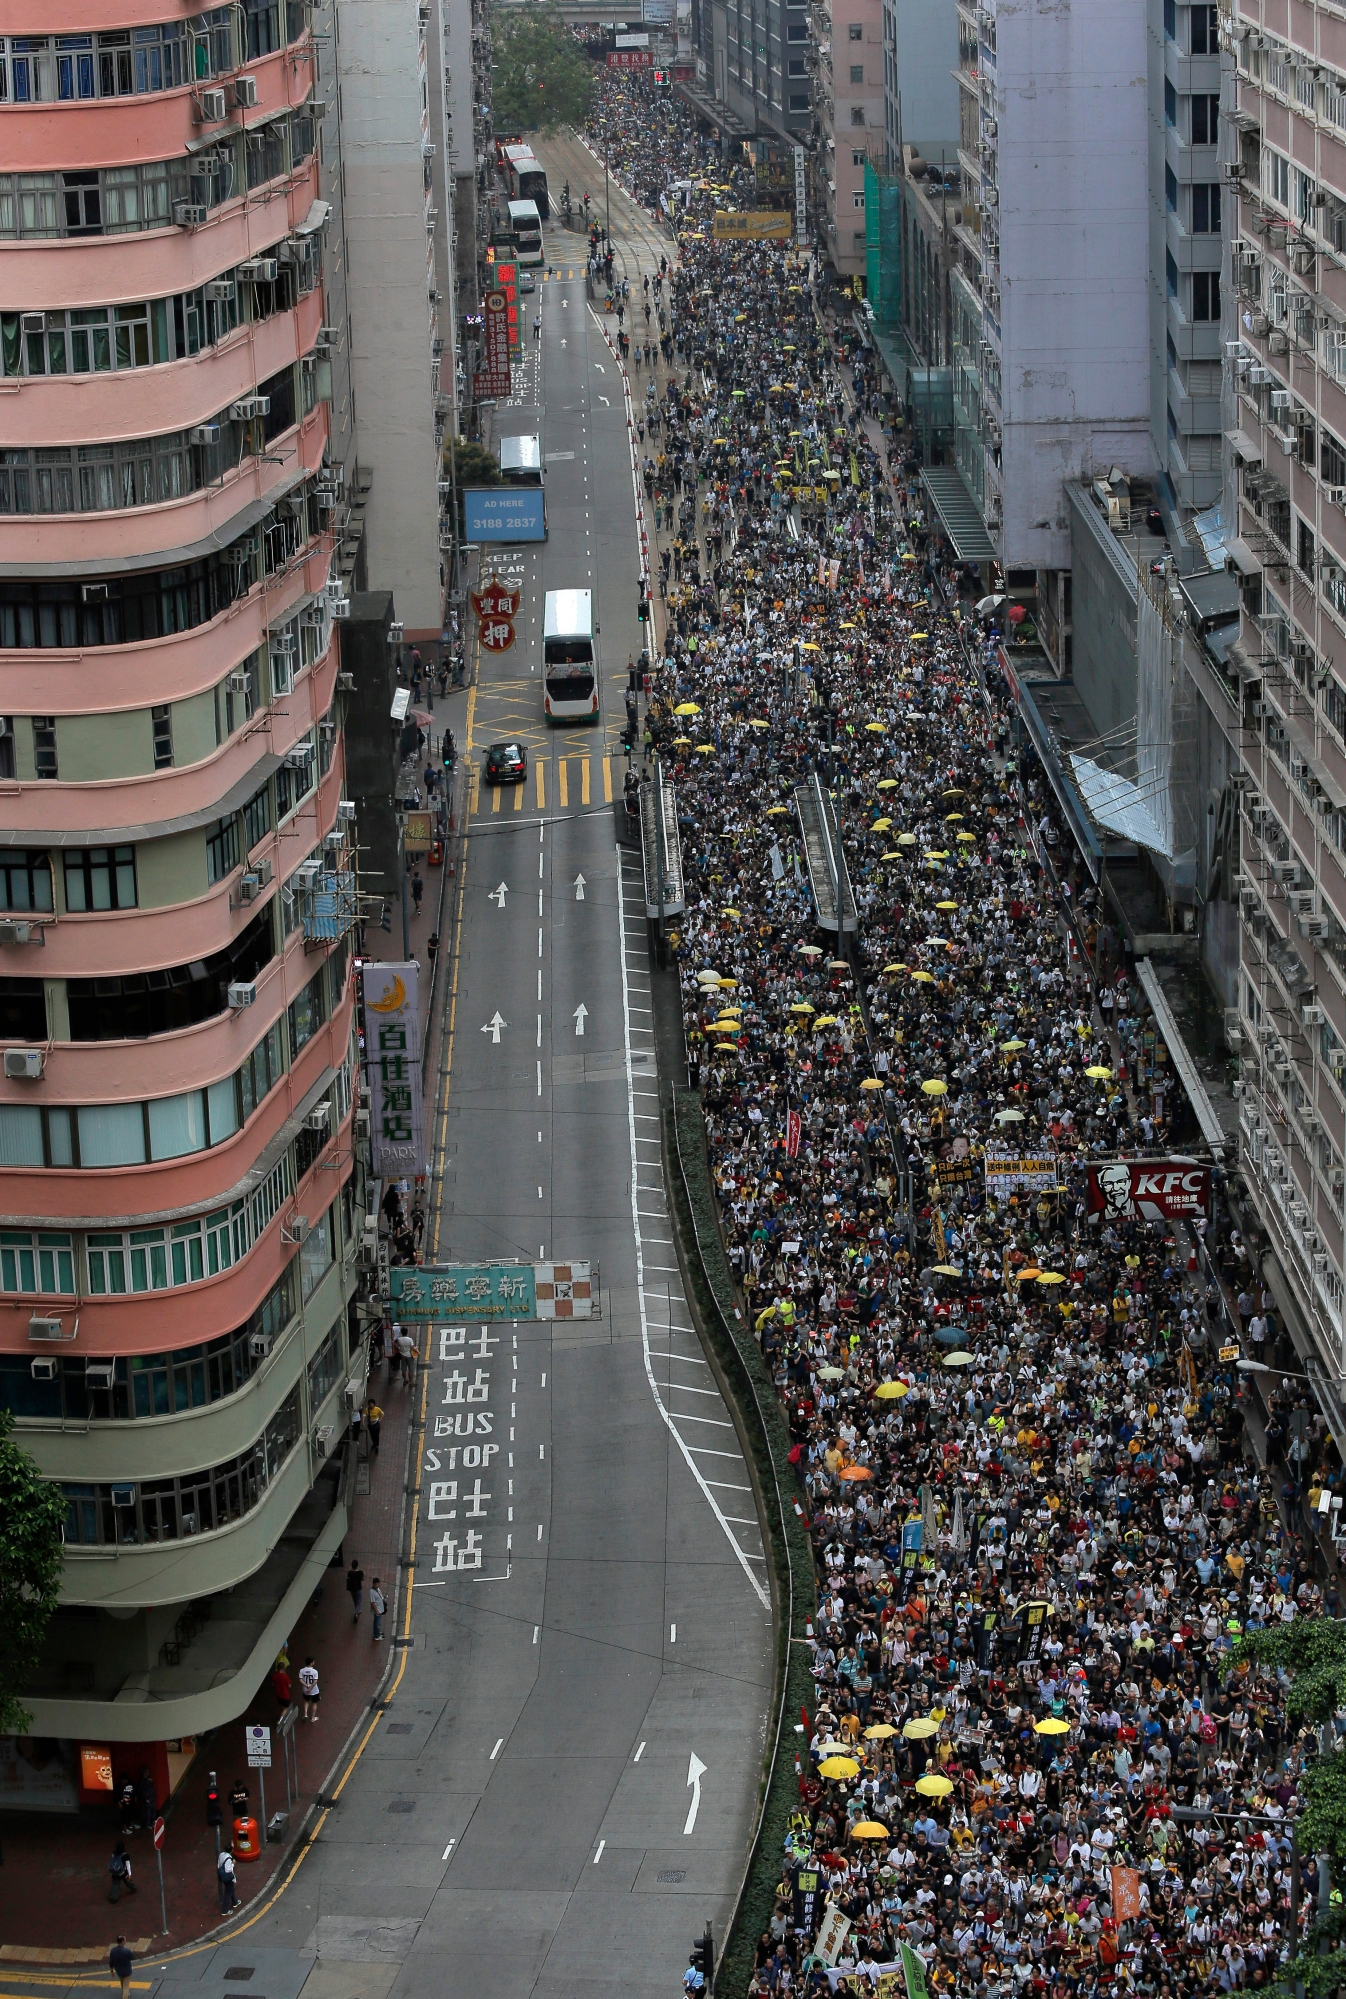 Protesters against an extradition law march along a downtown street in Hong Kong Sunday, April 28, 2019. Thousands of people protested to express their concerns about the proposed new extradition law that would make it possible for people to be sent to mainland China to face the justice system there. (AP Photo/Vincent Yu) Hong Kong China Extradition Law